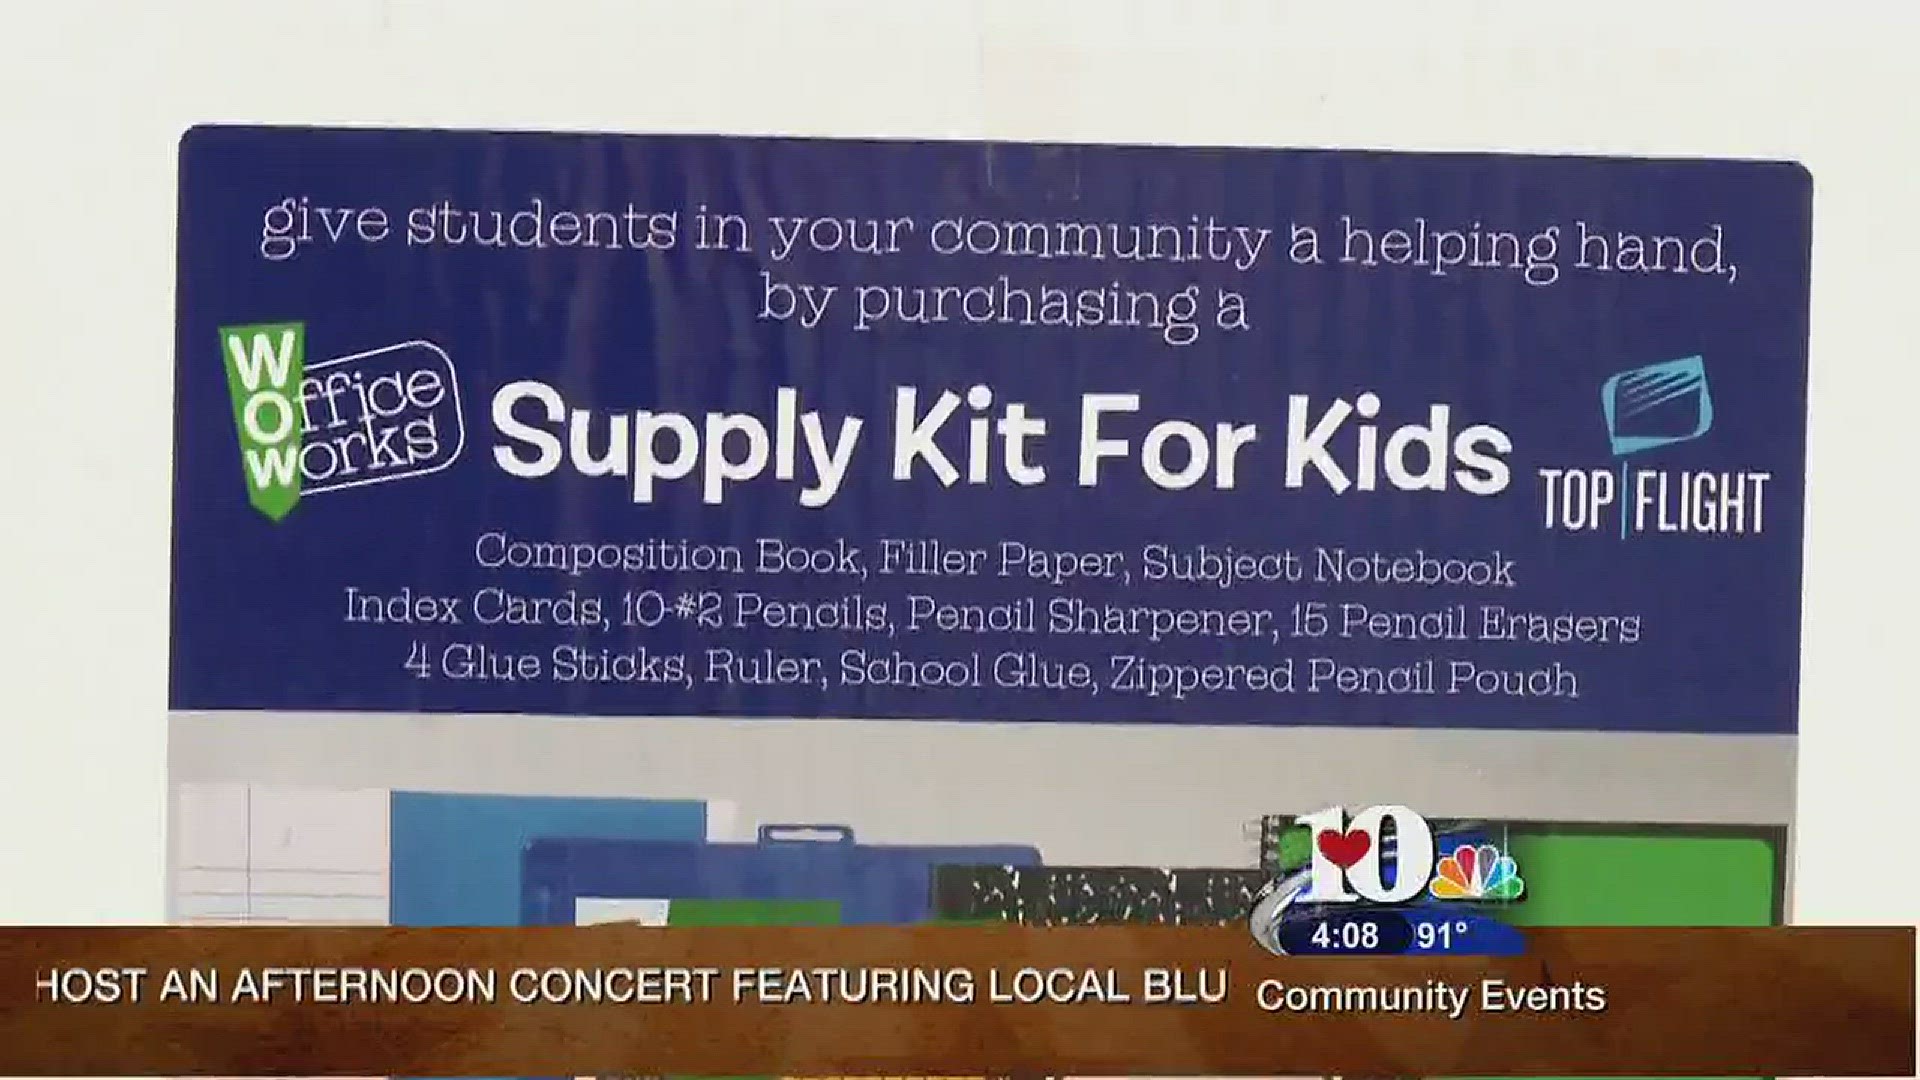 Kroger is selling "Tools for Schools" kits with school supplies to buy and donate to students that cannot afford them. July 8, 2016.